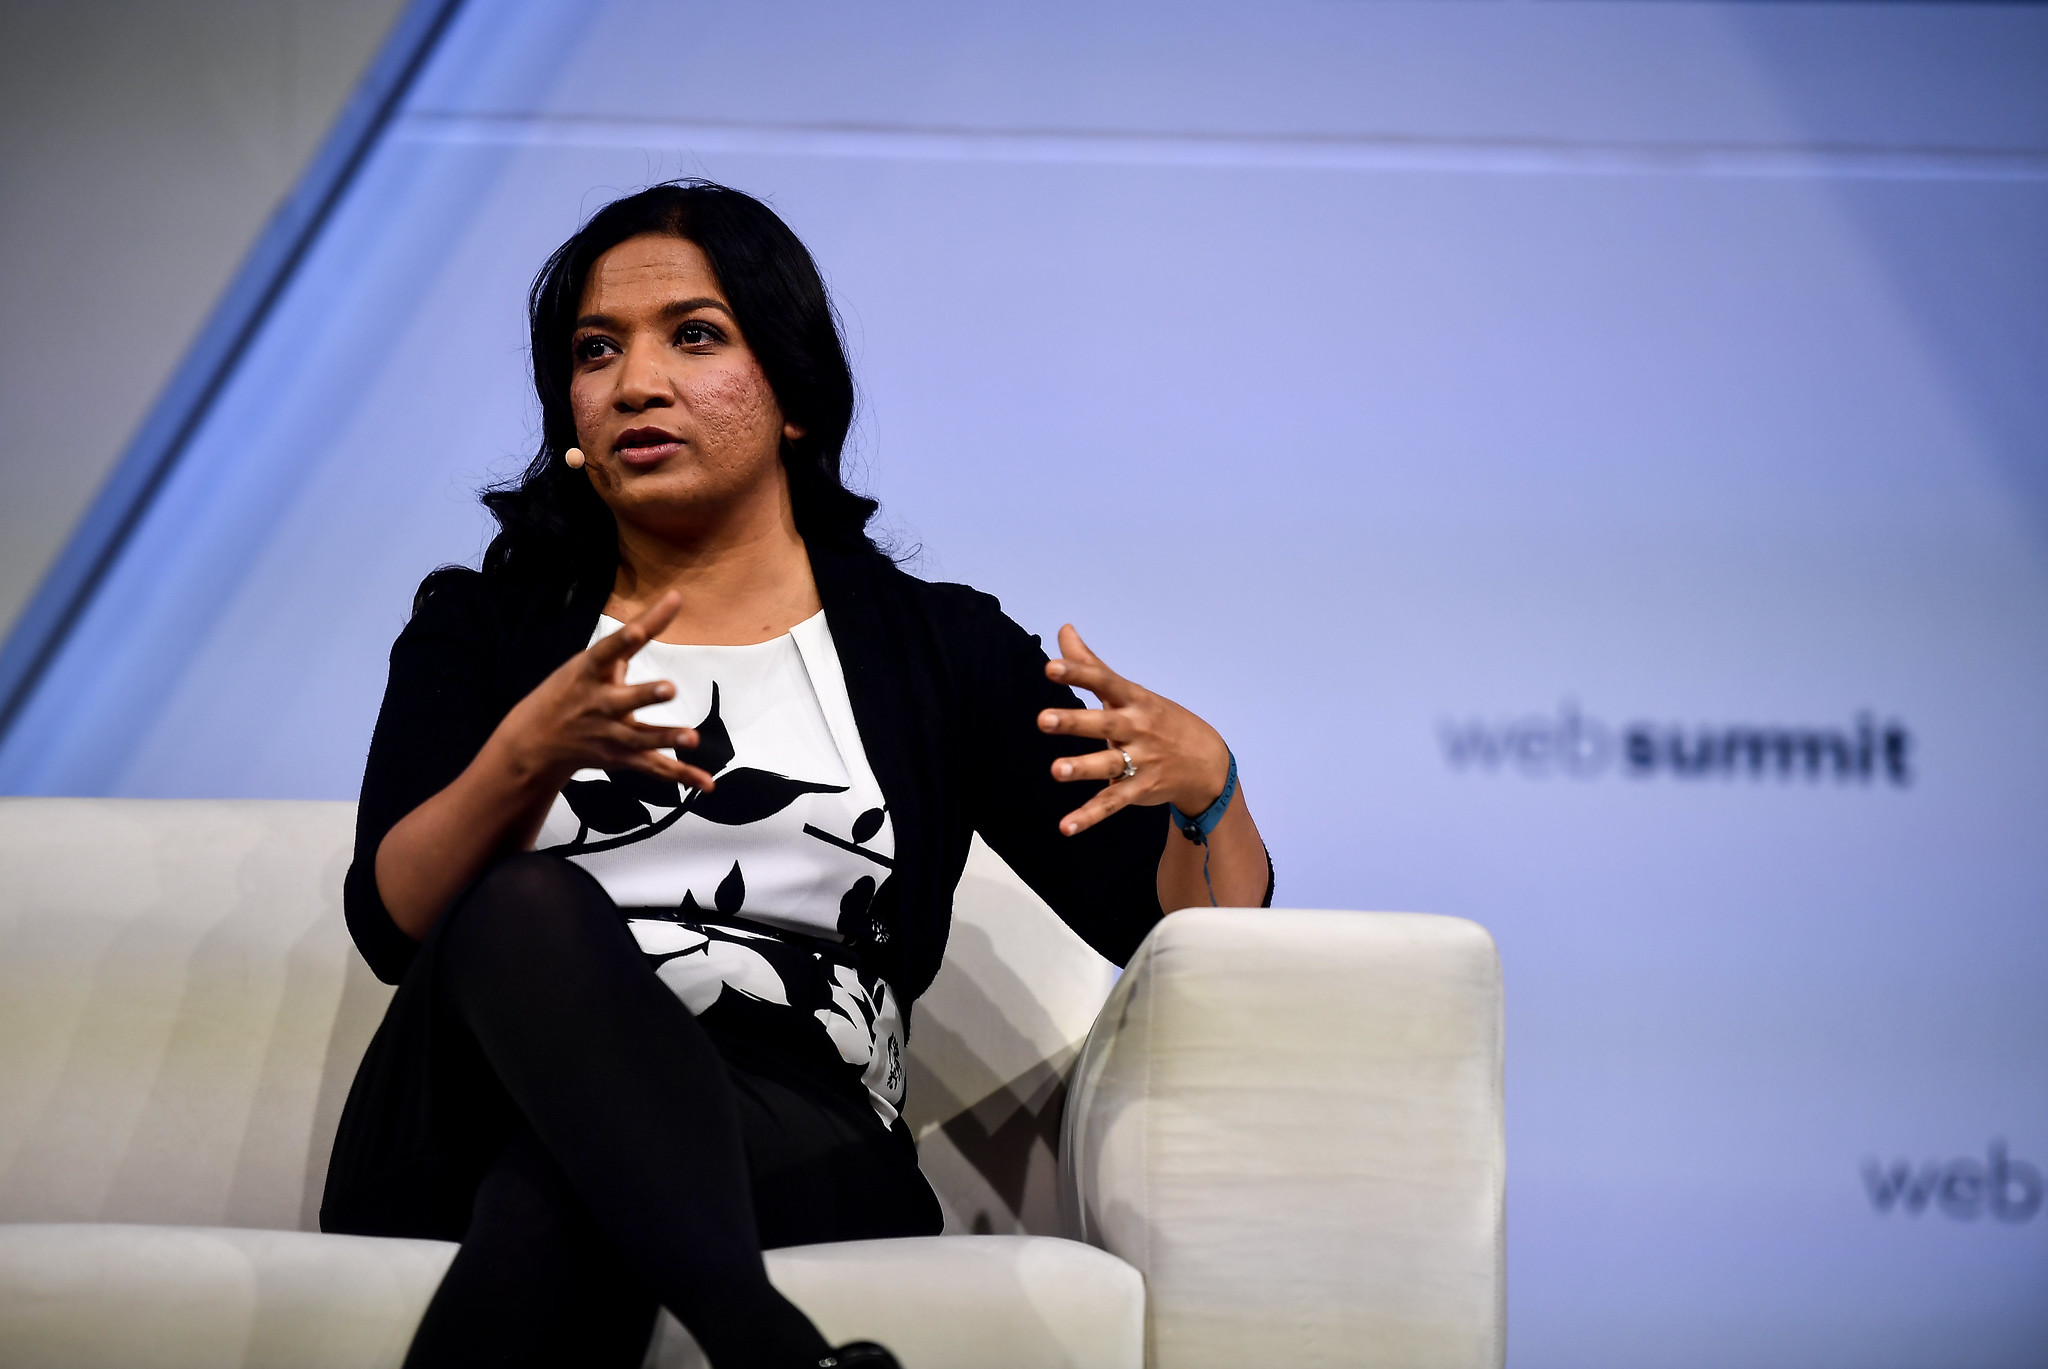 Rashmi Gopinath is pictured sitting on a couch giving a talk on FullSTK stage at Collision 2019. Rashmi appears to be wearing a microphone and is motioning with their hands. The Web Summit logo appears on the wall in the background.